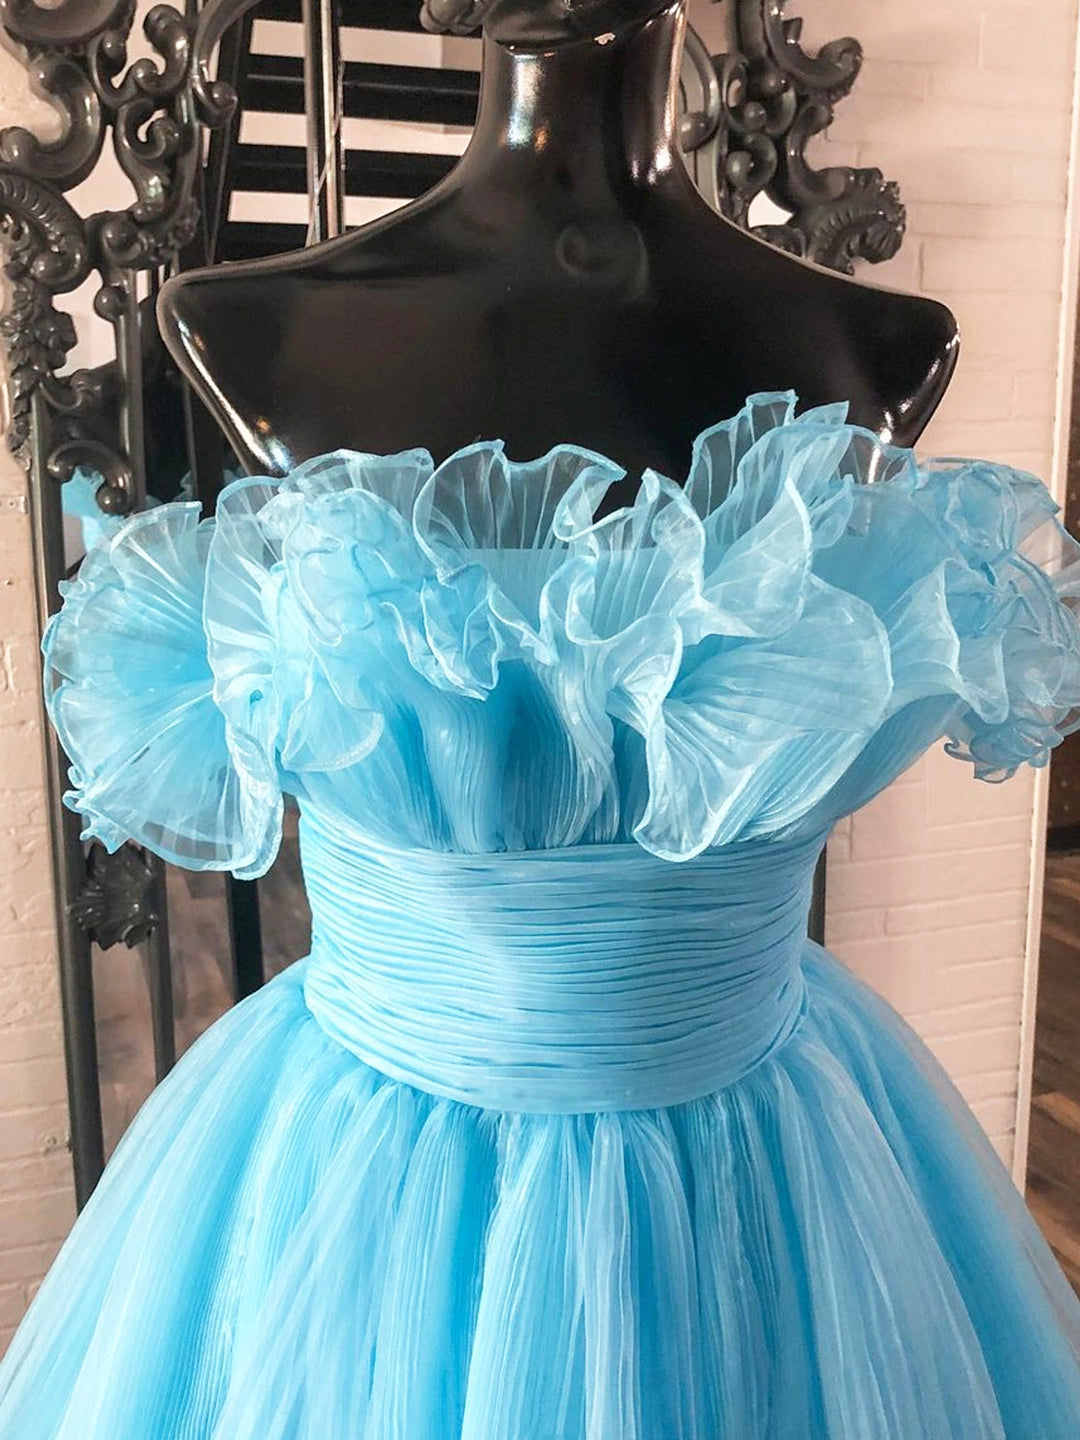 Party Dress Dress Code, Lovely Blue Strapless A-Line Short Prom Dress, Organza Pleated Ruffle Tiered  Homecoming Dress